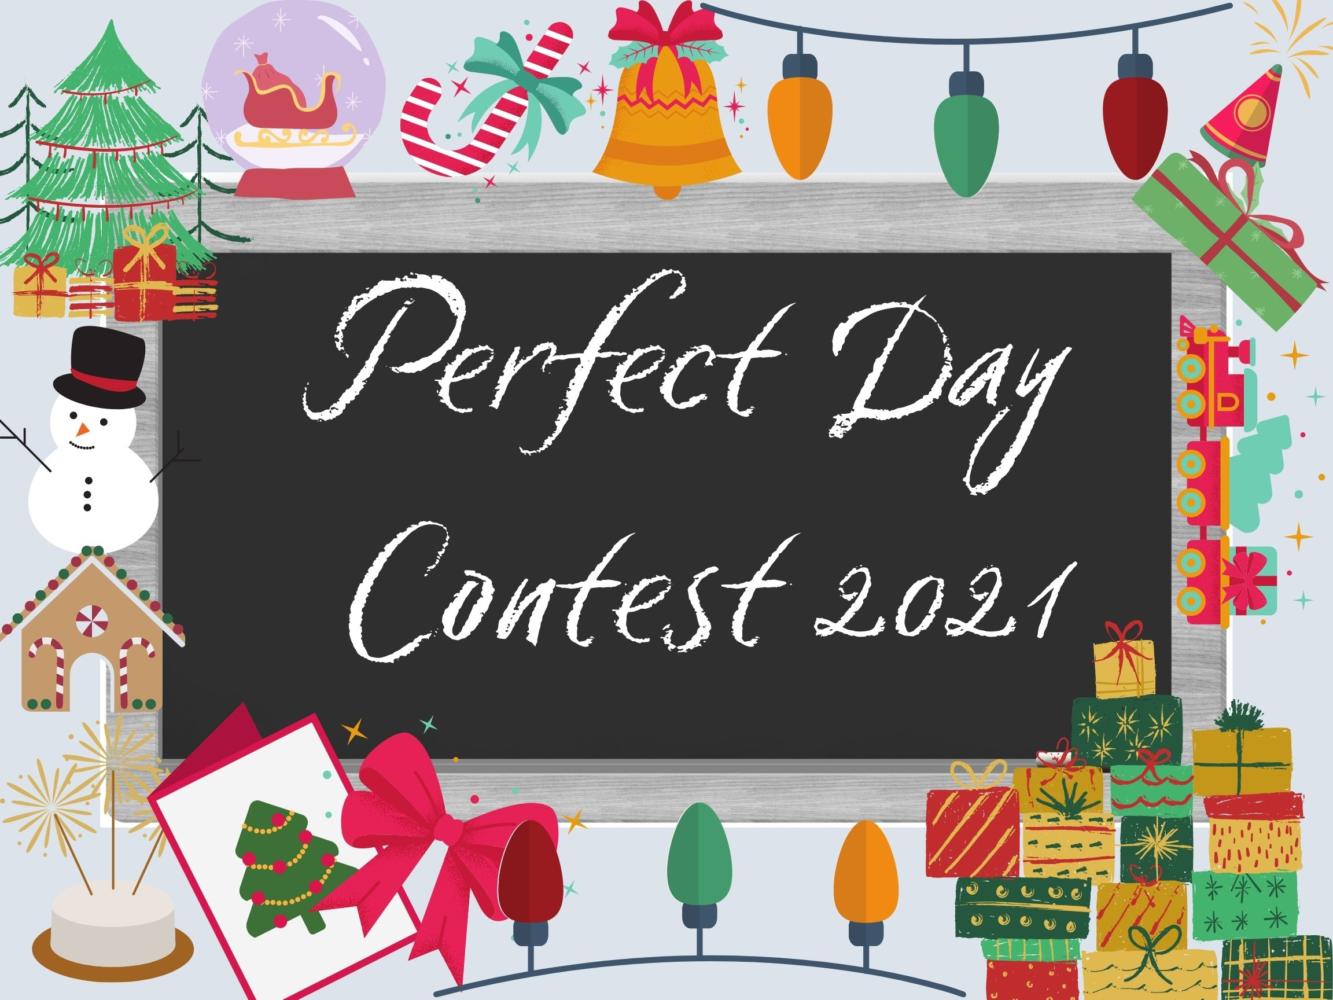 Perfect+Day+Contest+2021